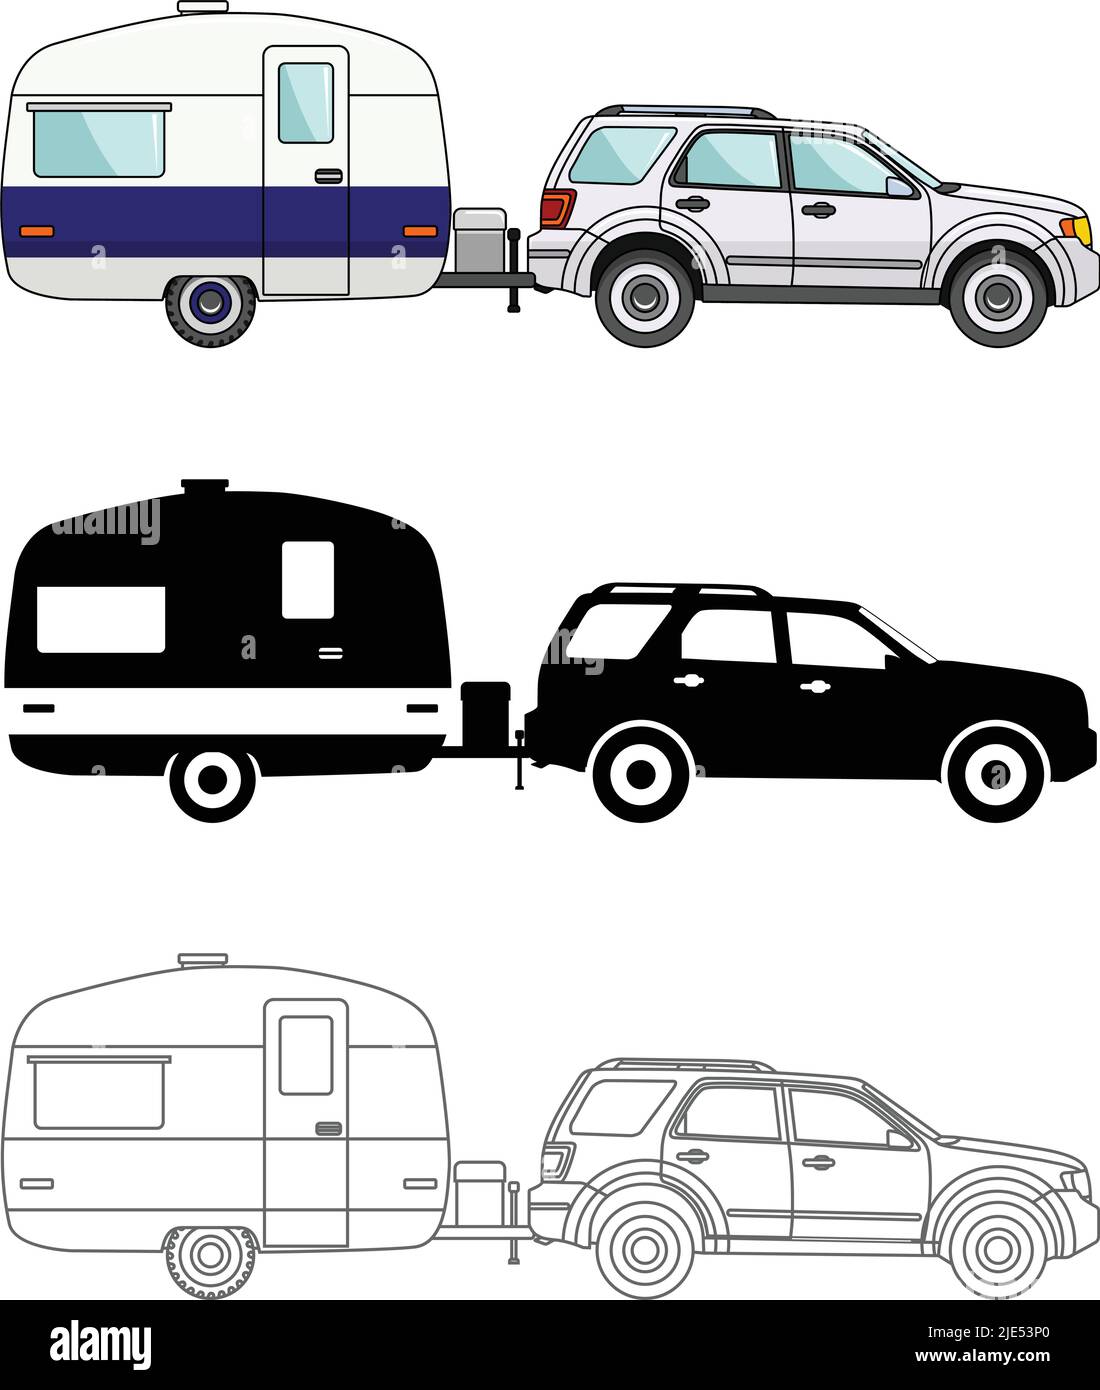 Different kind car and travel trailers isolated on white background in flat style: colored, black silhouette, contour. Vector illustration. Stock Vector